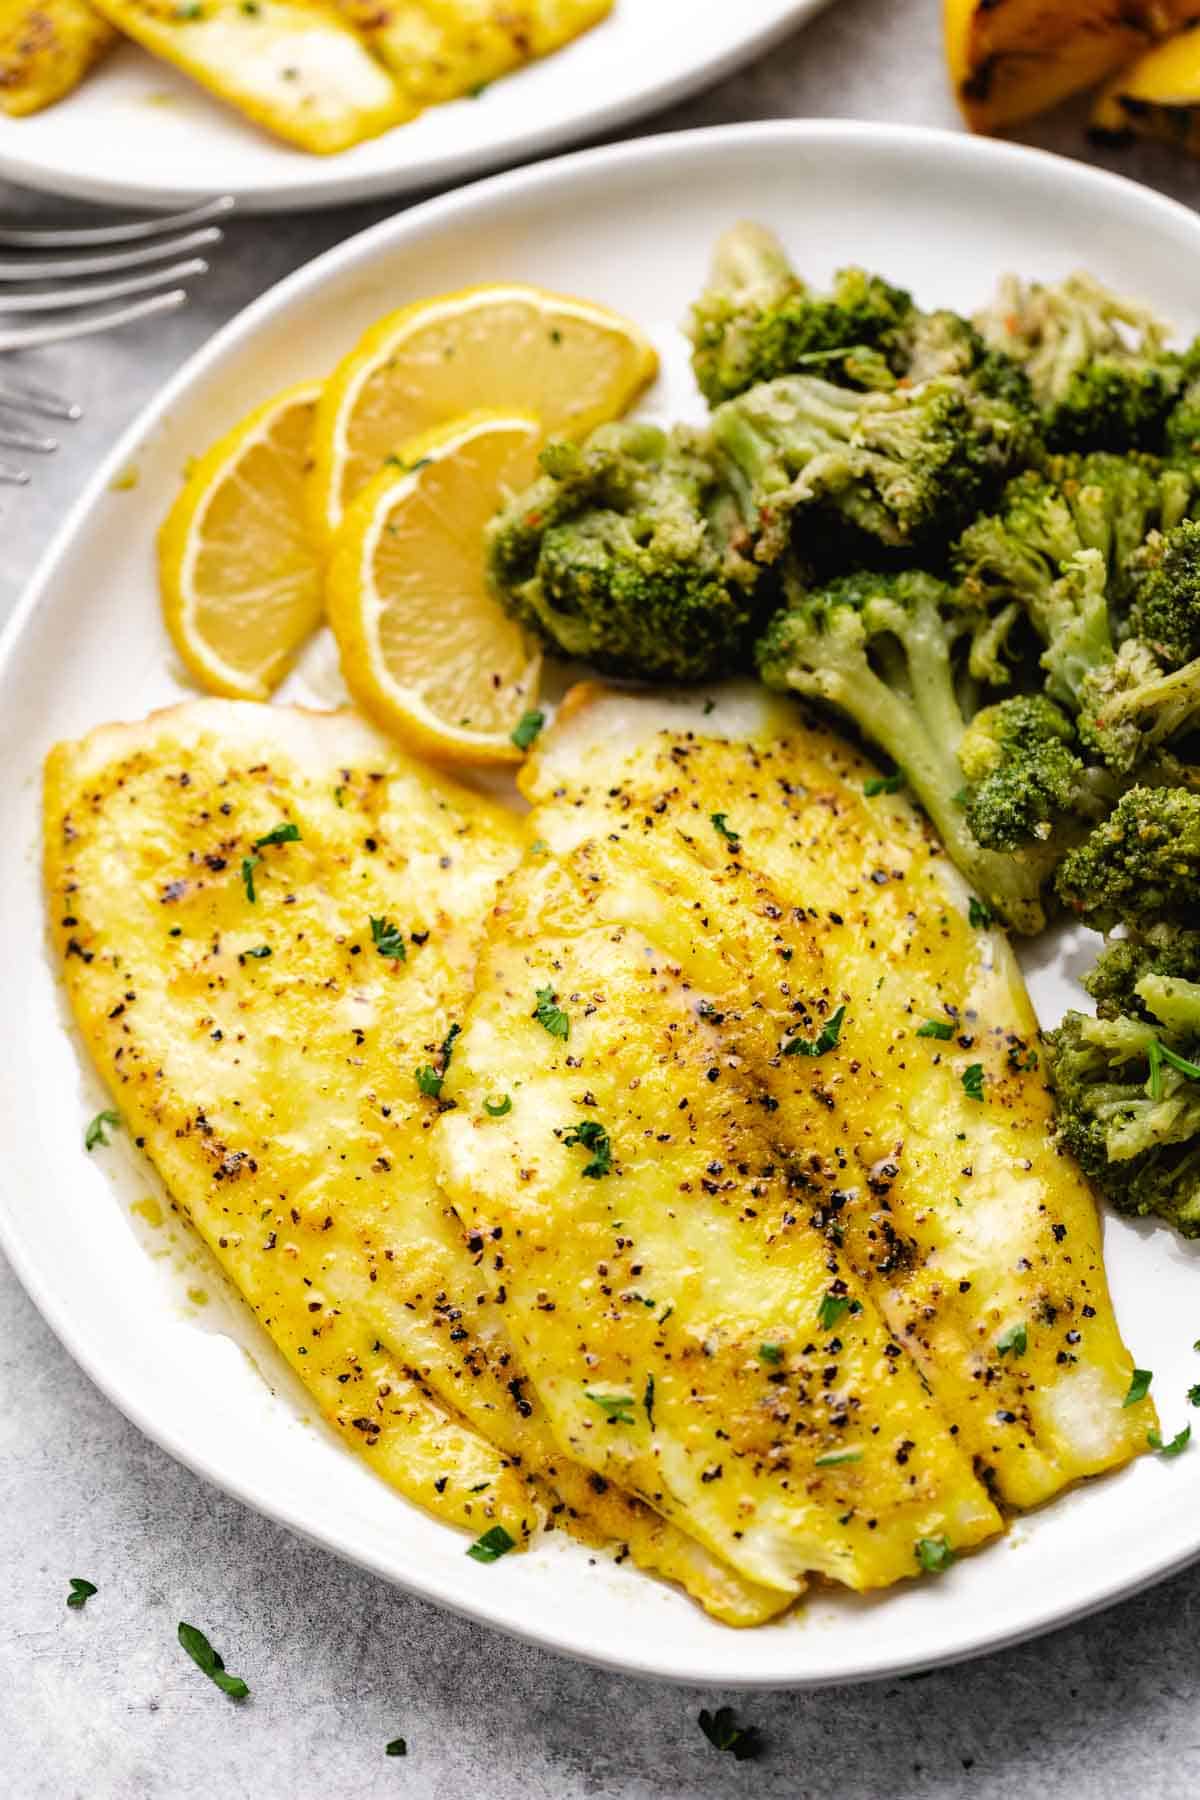 Fillets of flounder on a plate with broccoli.